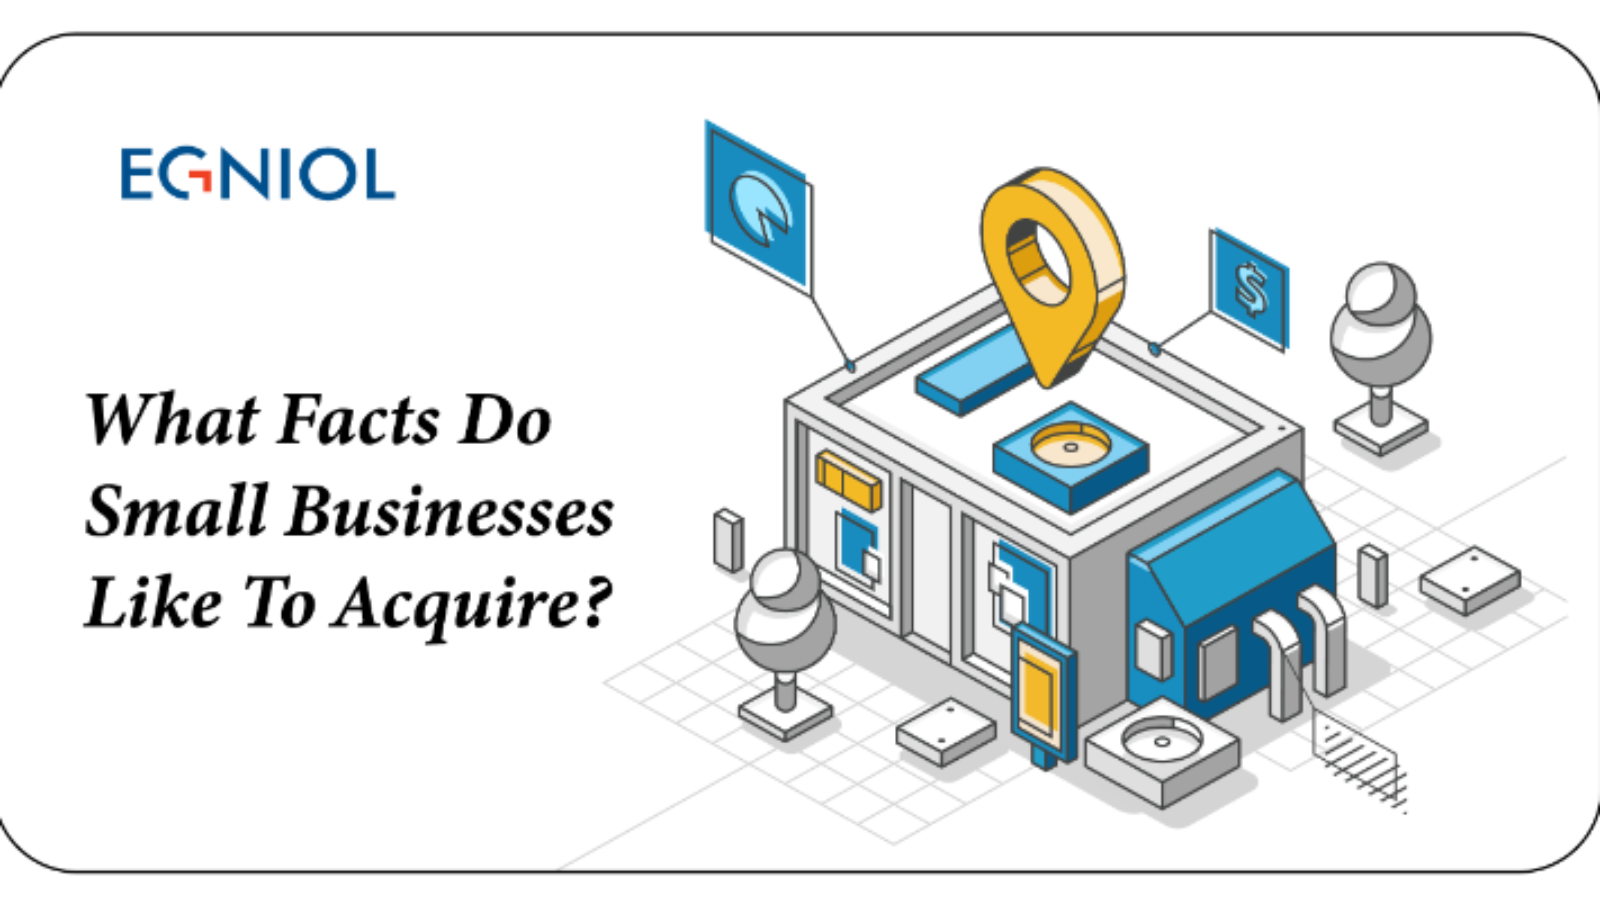 What Facts Do Small Businesses Like To Acquire - By Egniol